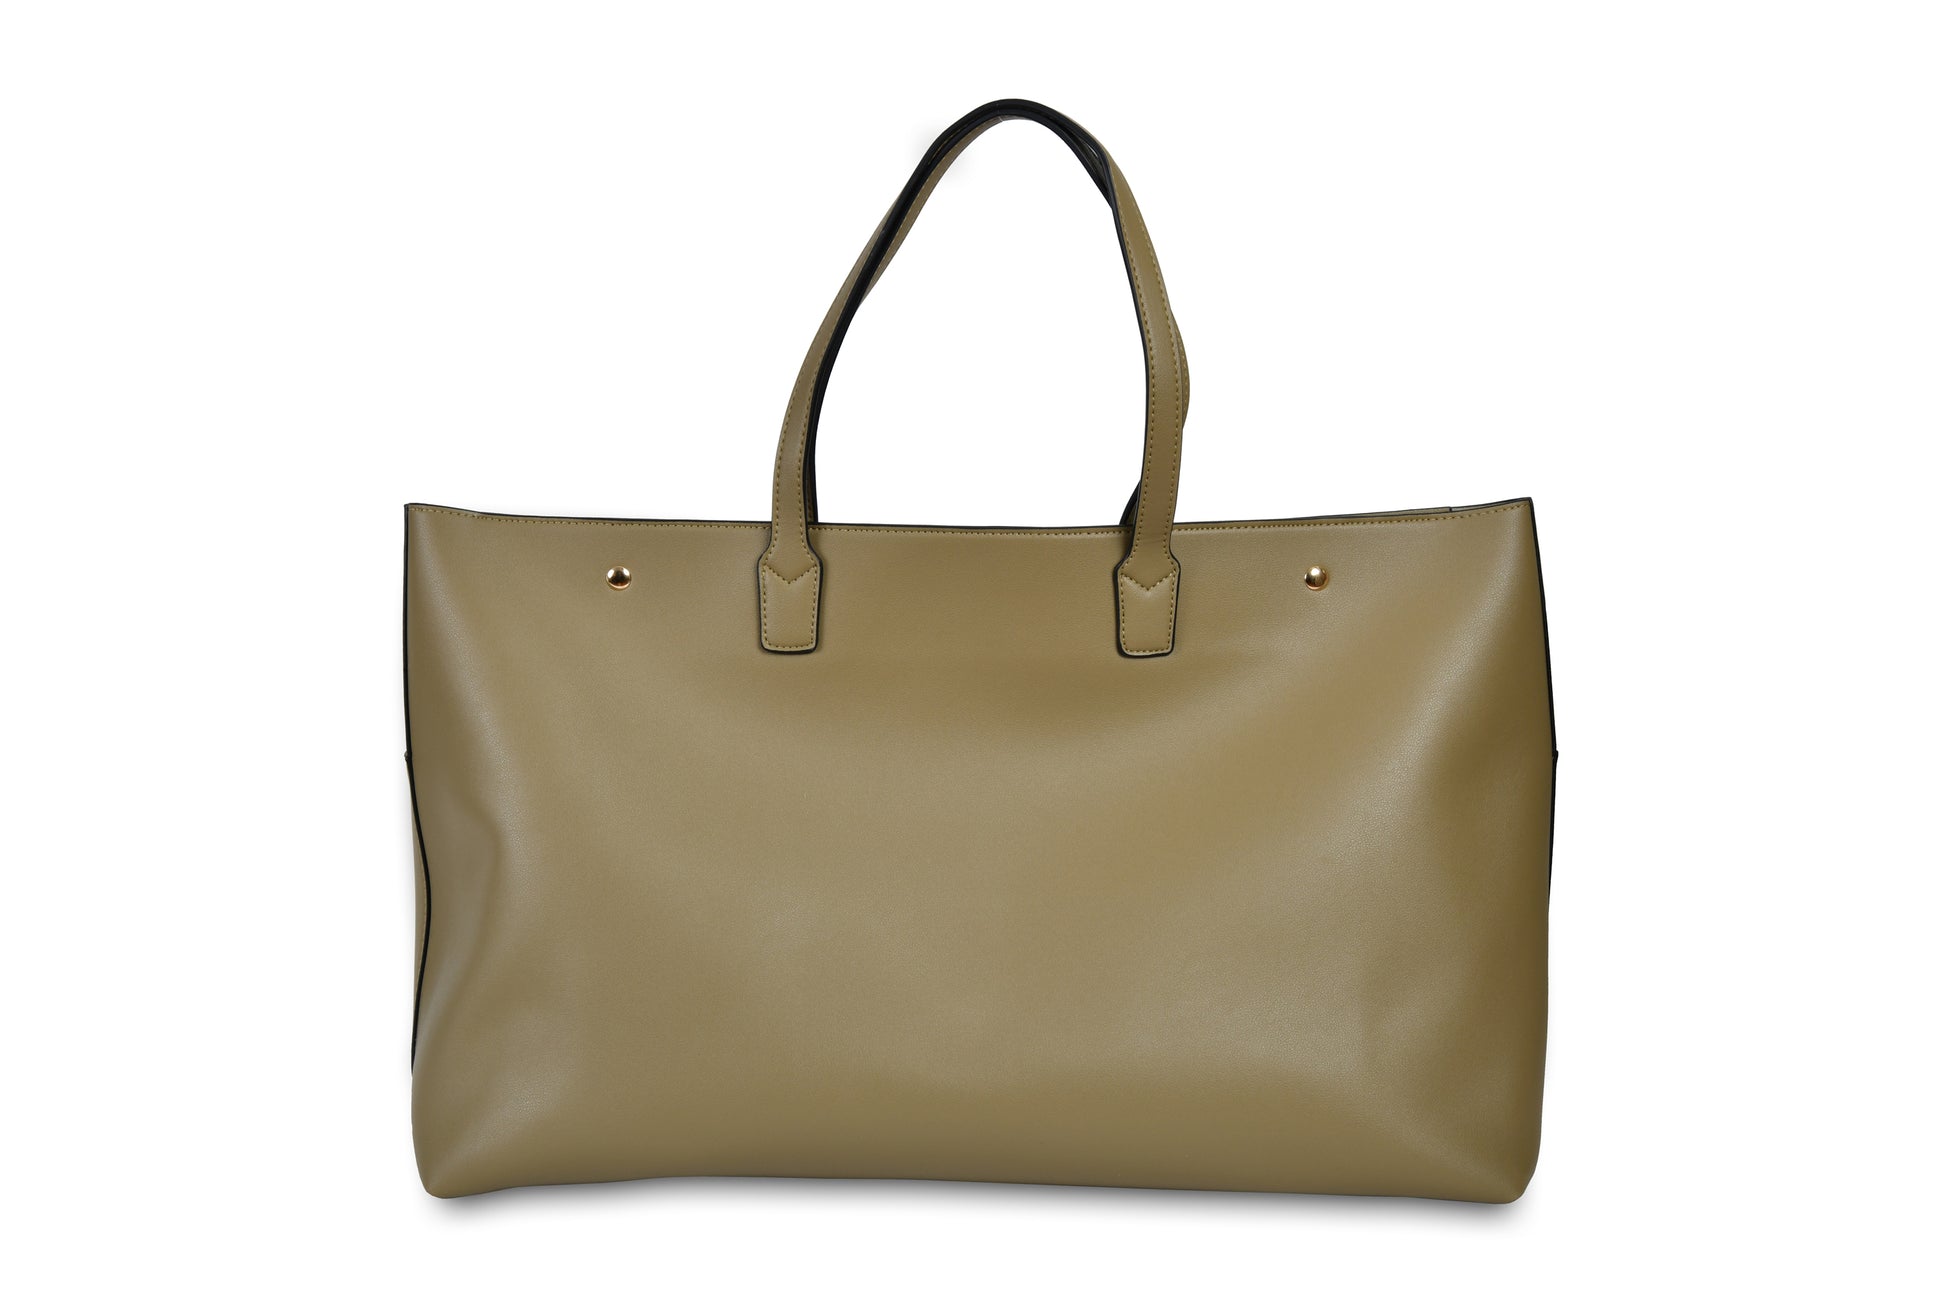 Zuma Pebble Grain Faux Leather Olive Green Big Tote Bag Beach Bag made bye Dewi Maya back view available at the best boutique in Upstate South Carolina Spartanburg Greenville Dewi Maya Boutique